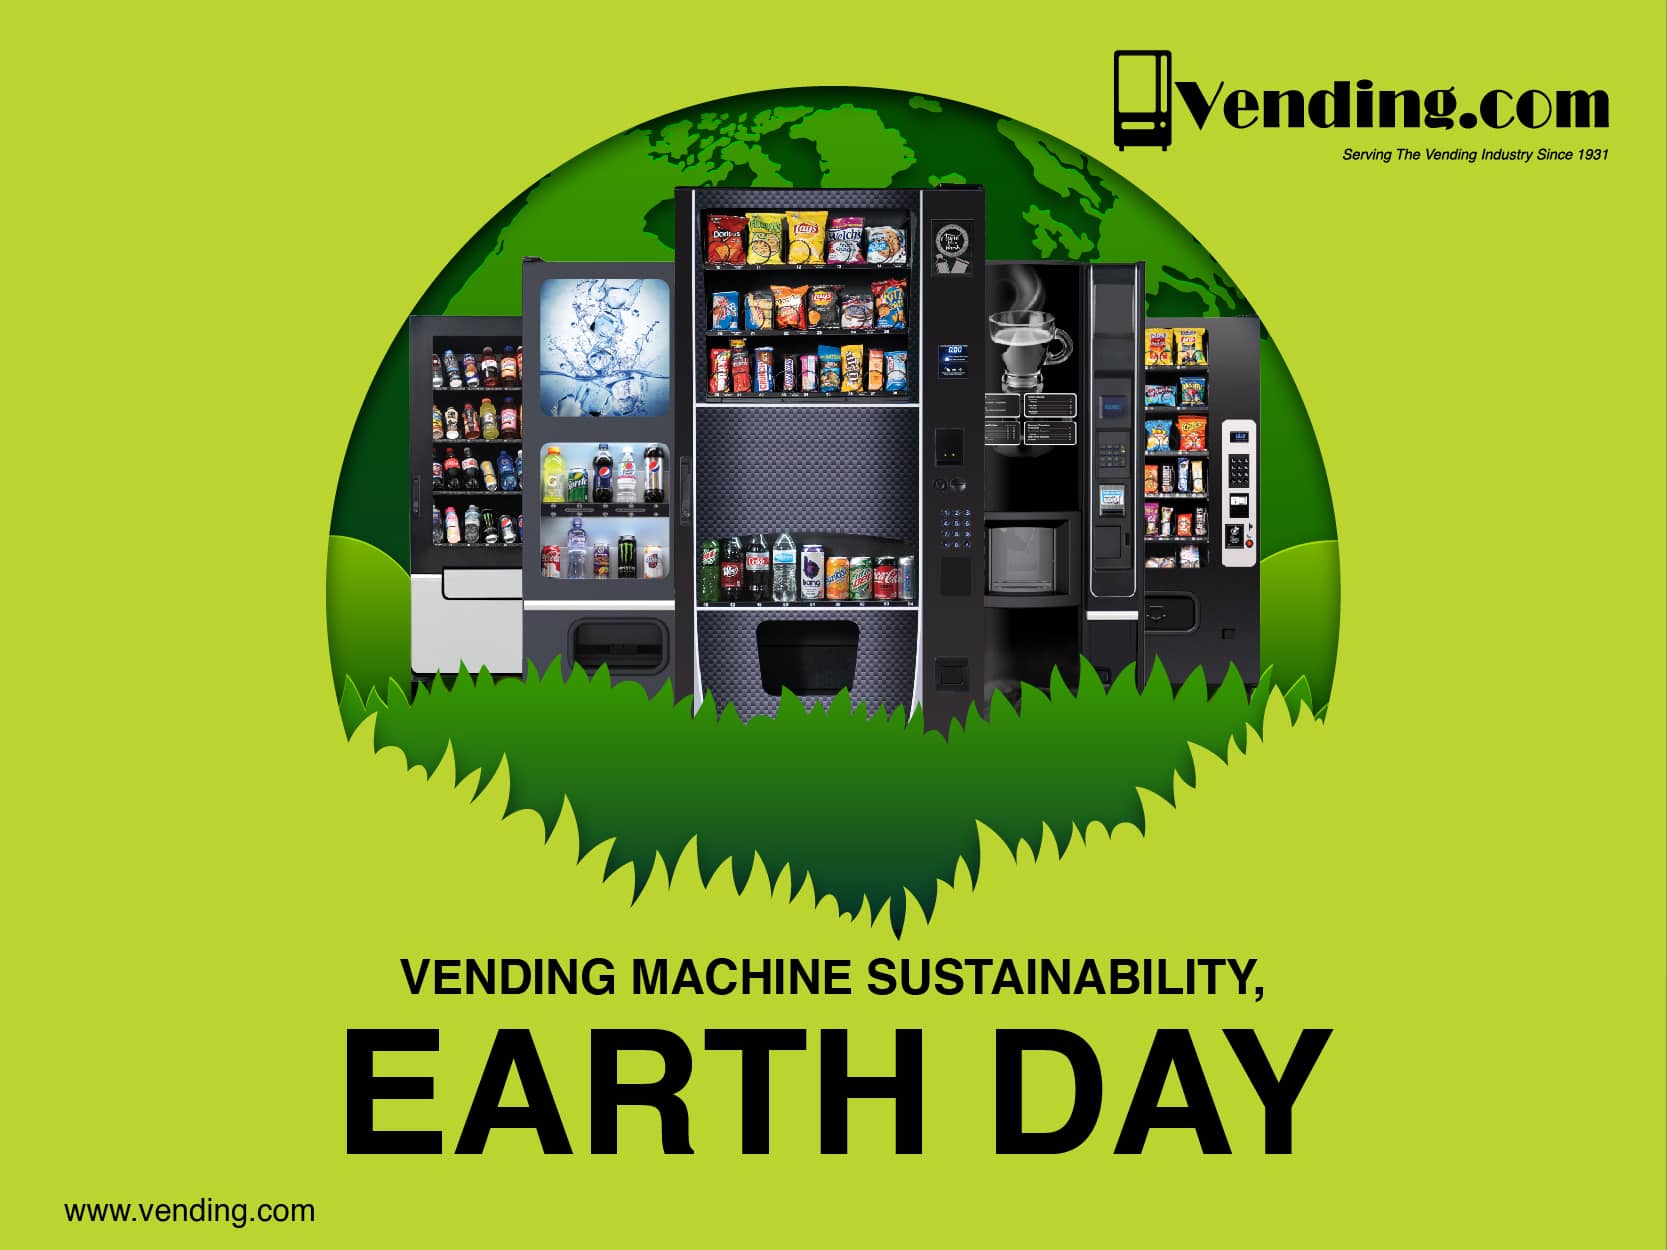 Earth Day and Vending Sustainability Goals - vending.com